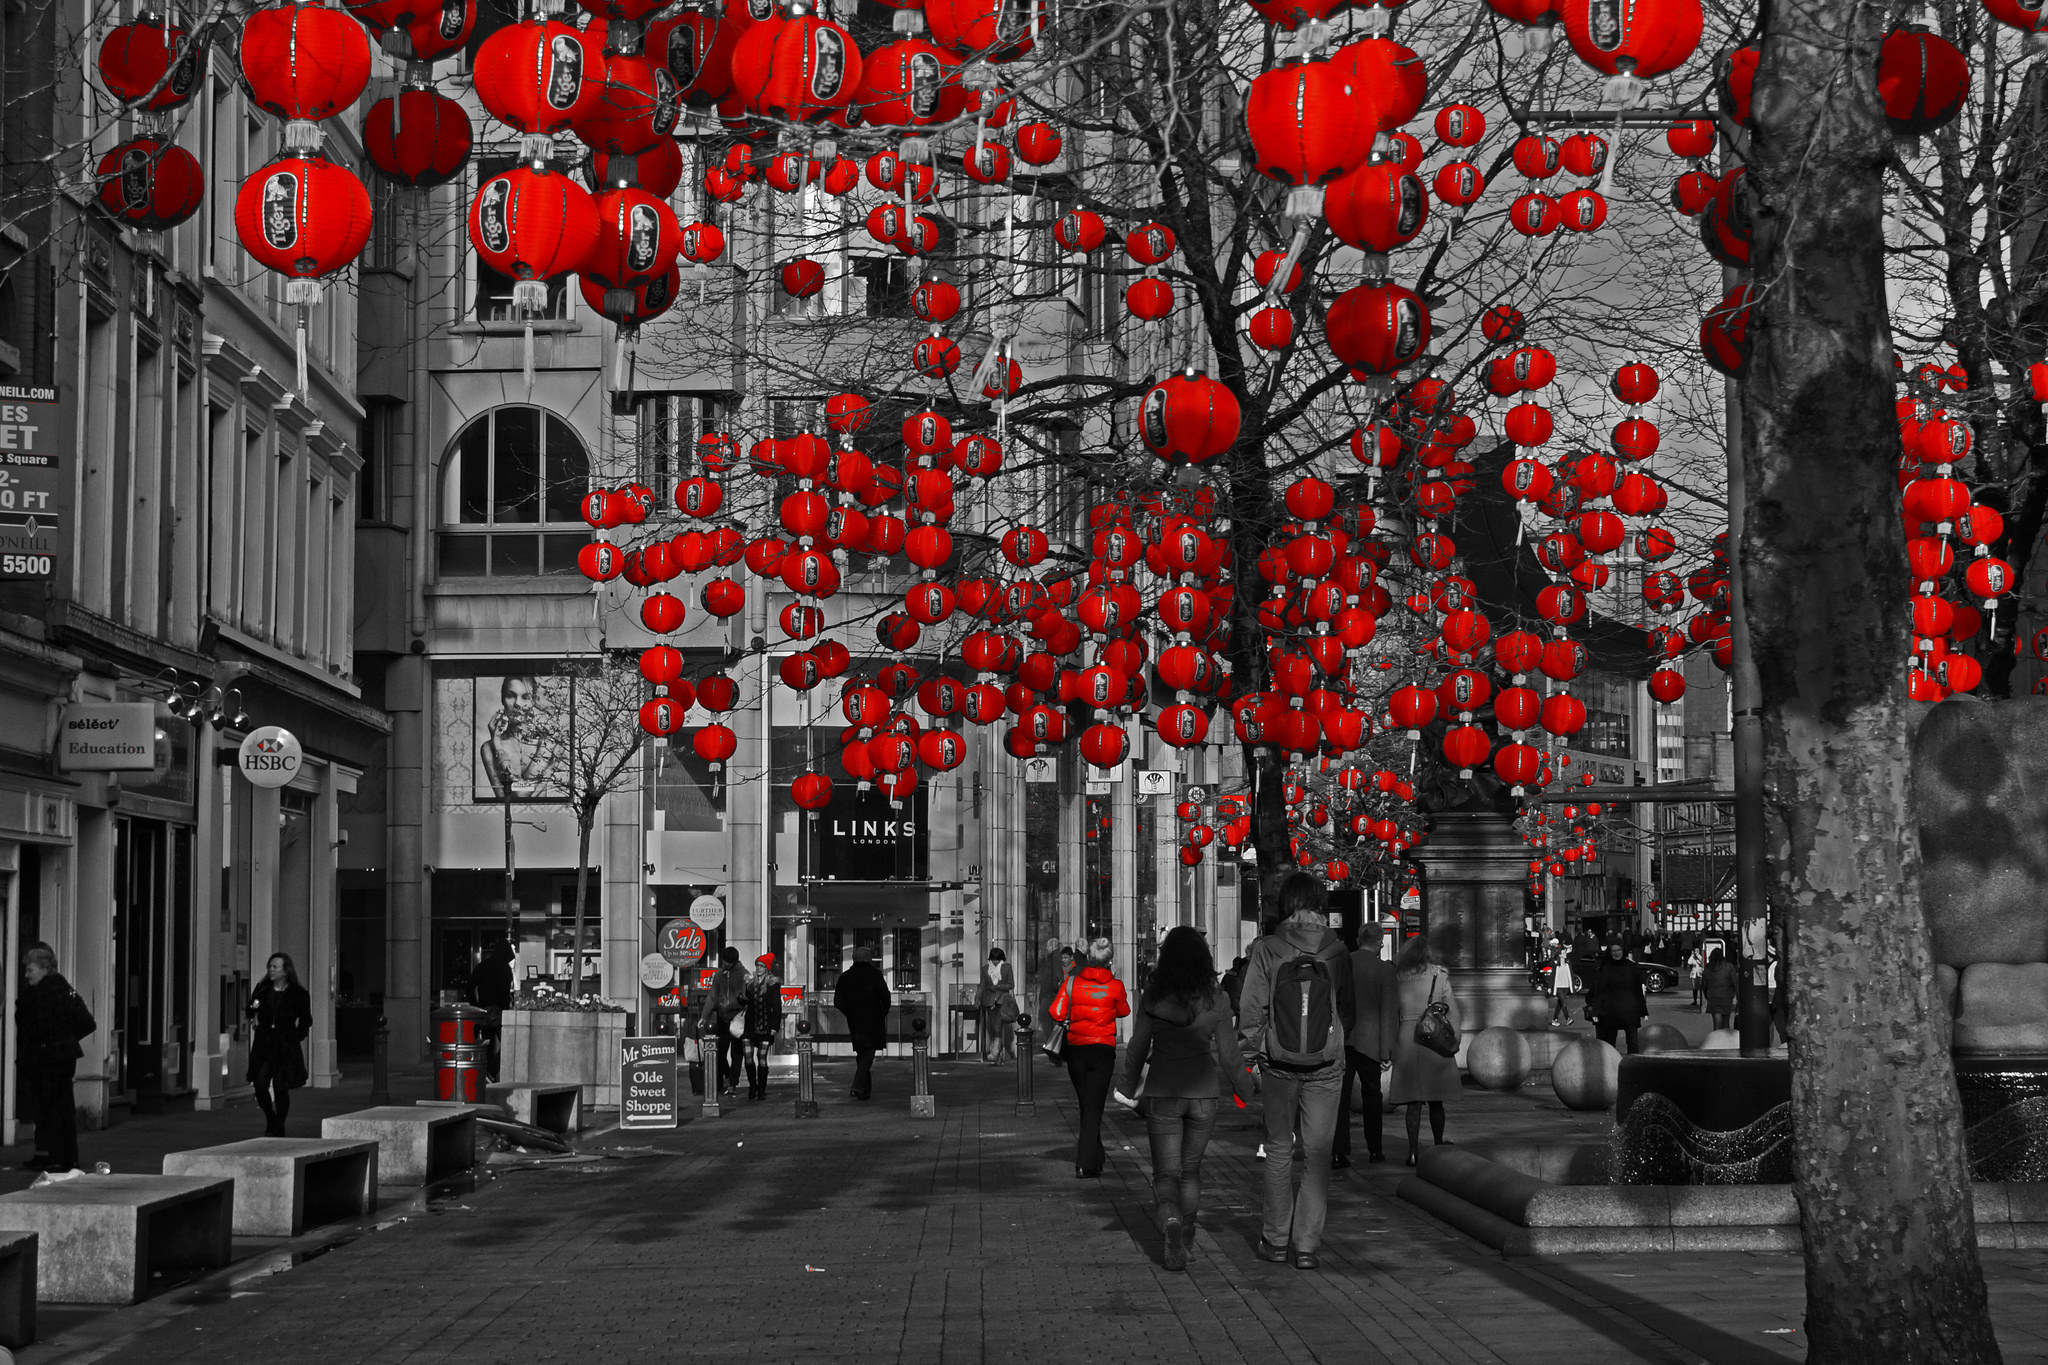 Lanterns in St Annes Square, Manchester, for the Chinese New Year. Flickr - Gidzy.